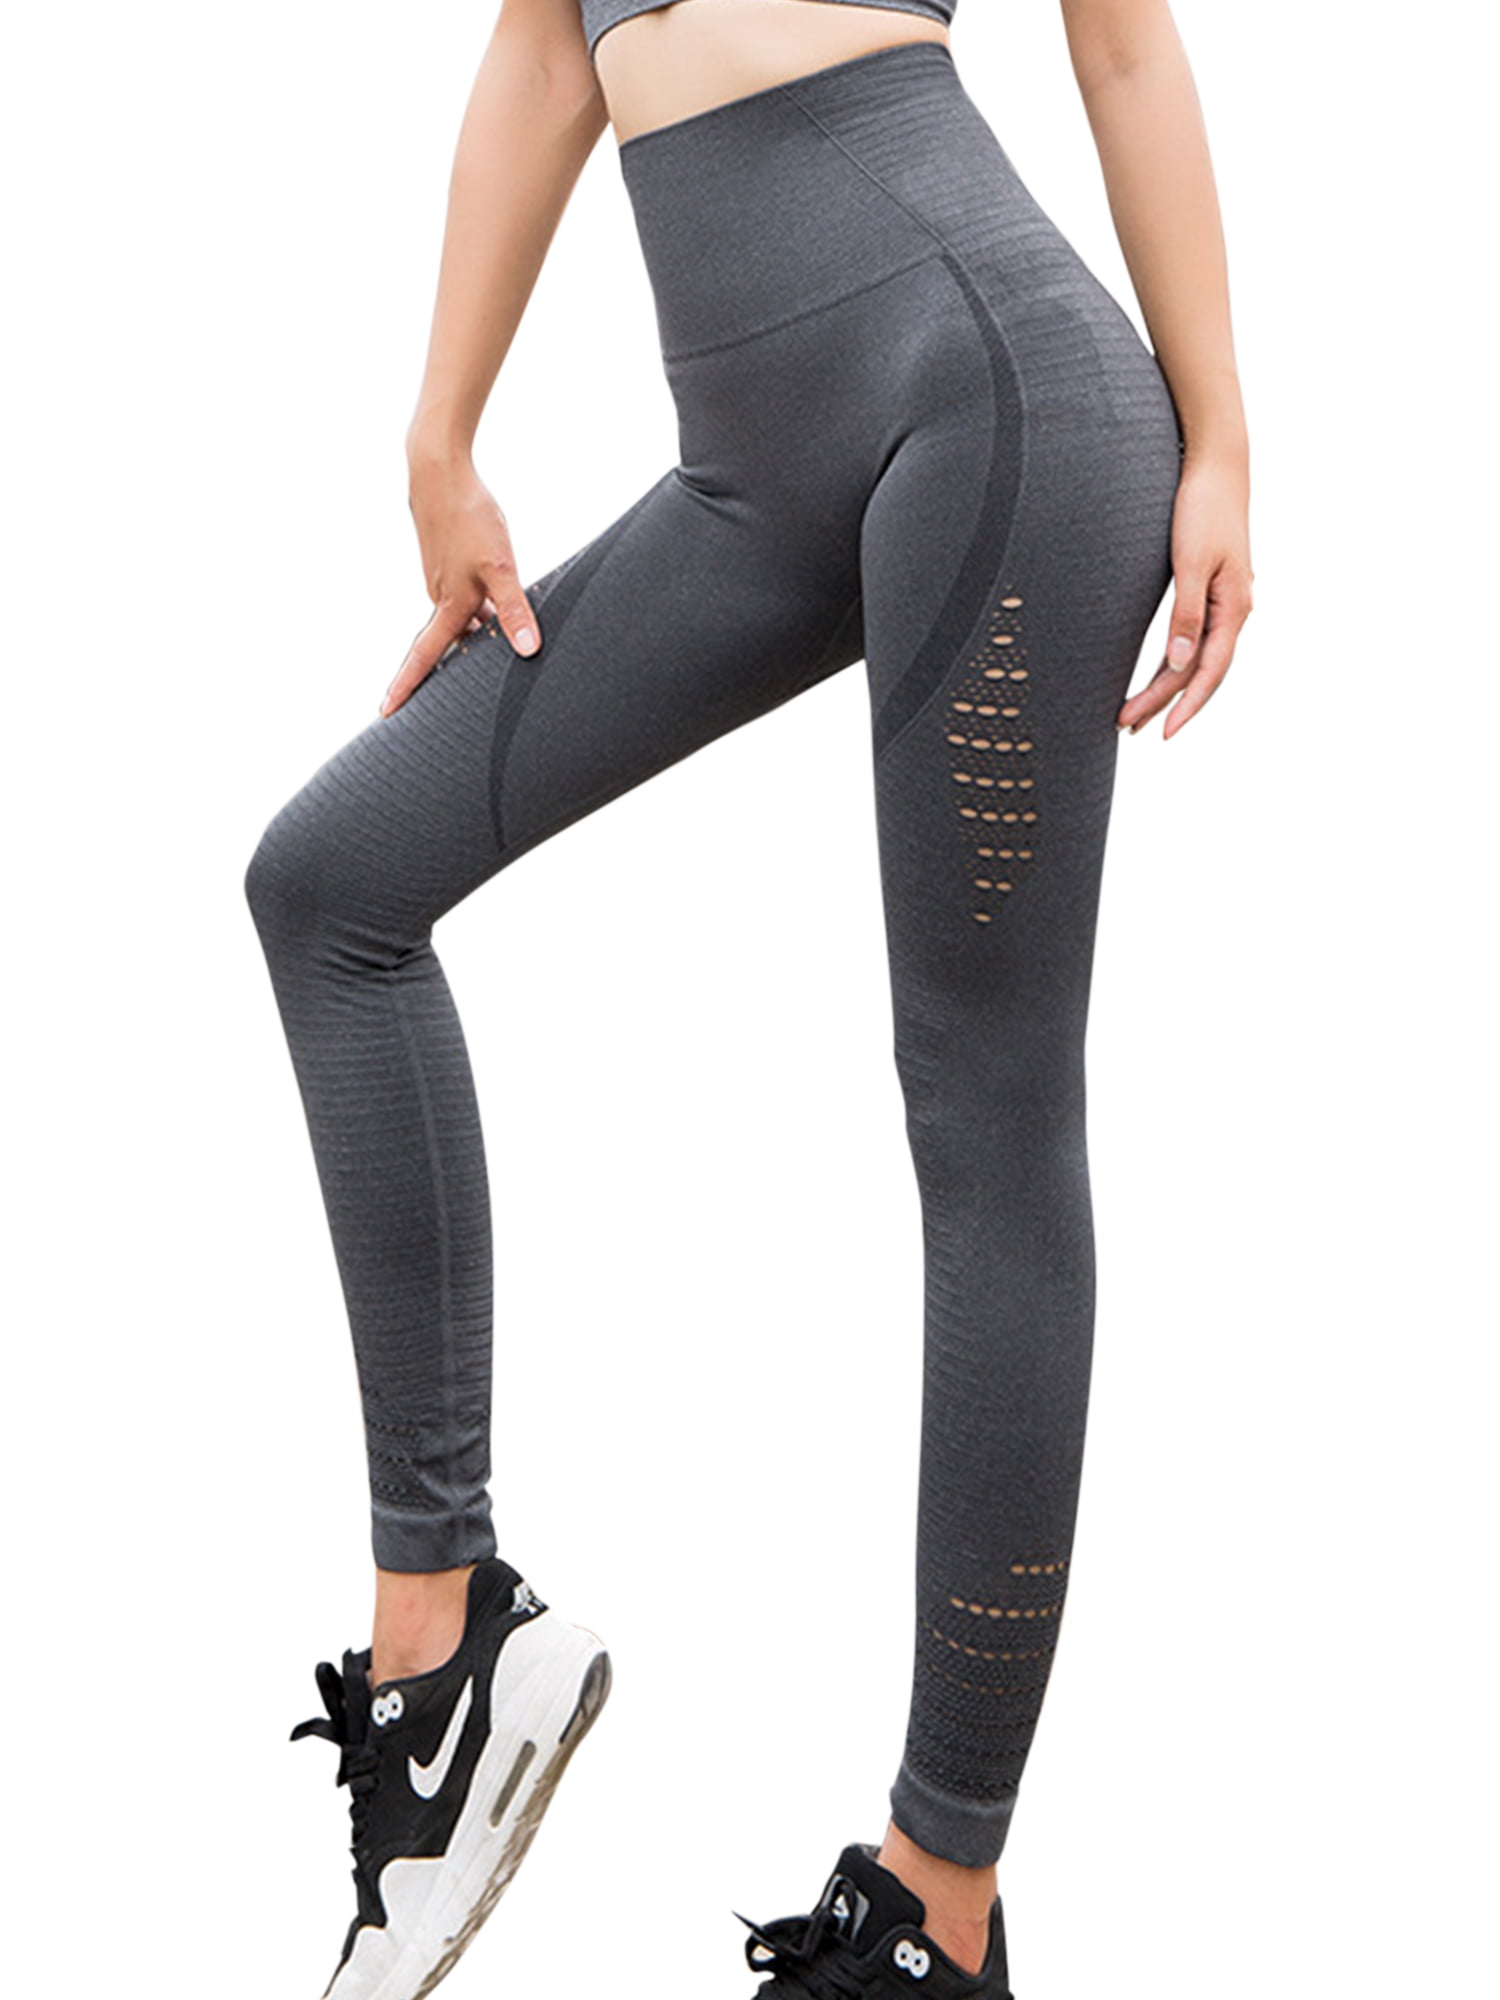 Details about  / Women Ladies Yoga Pants Gym Sports Hollow Out Fitness Leggings Trousers Bottoms